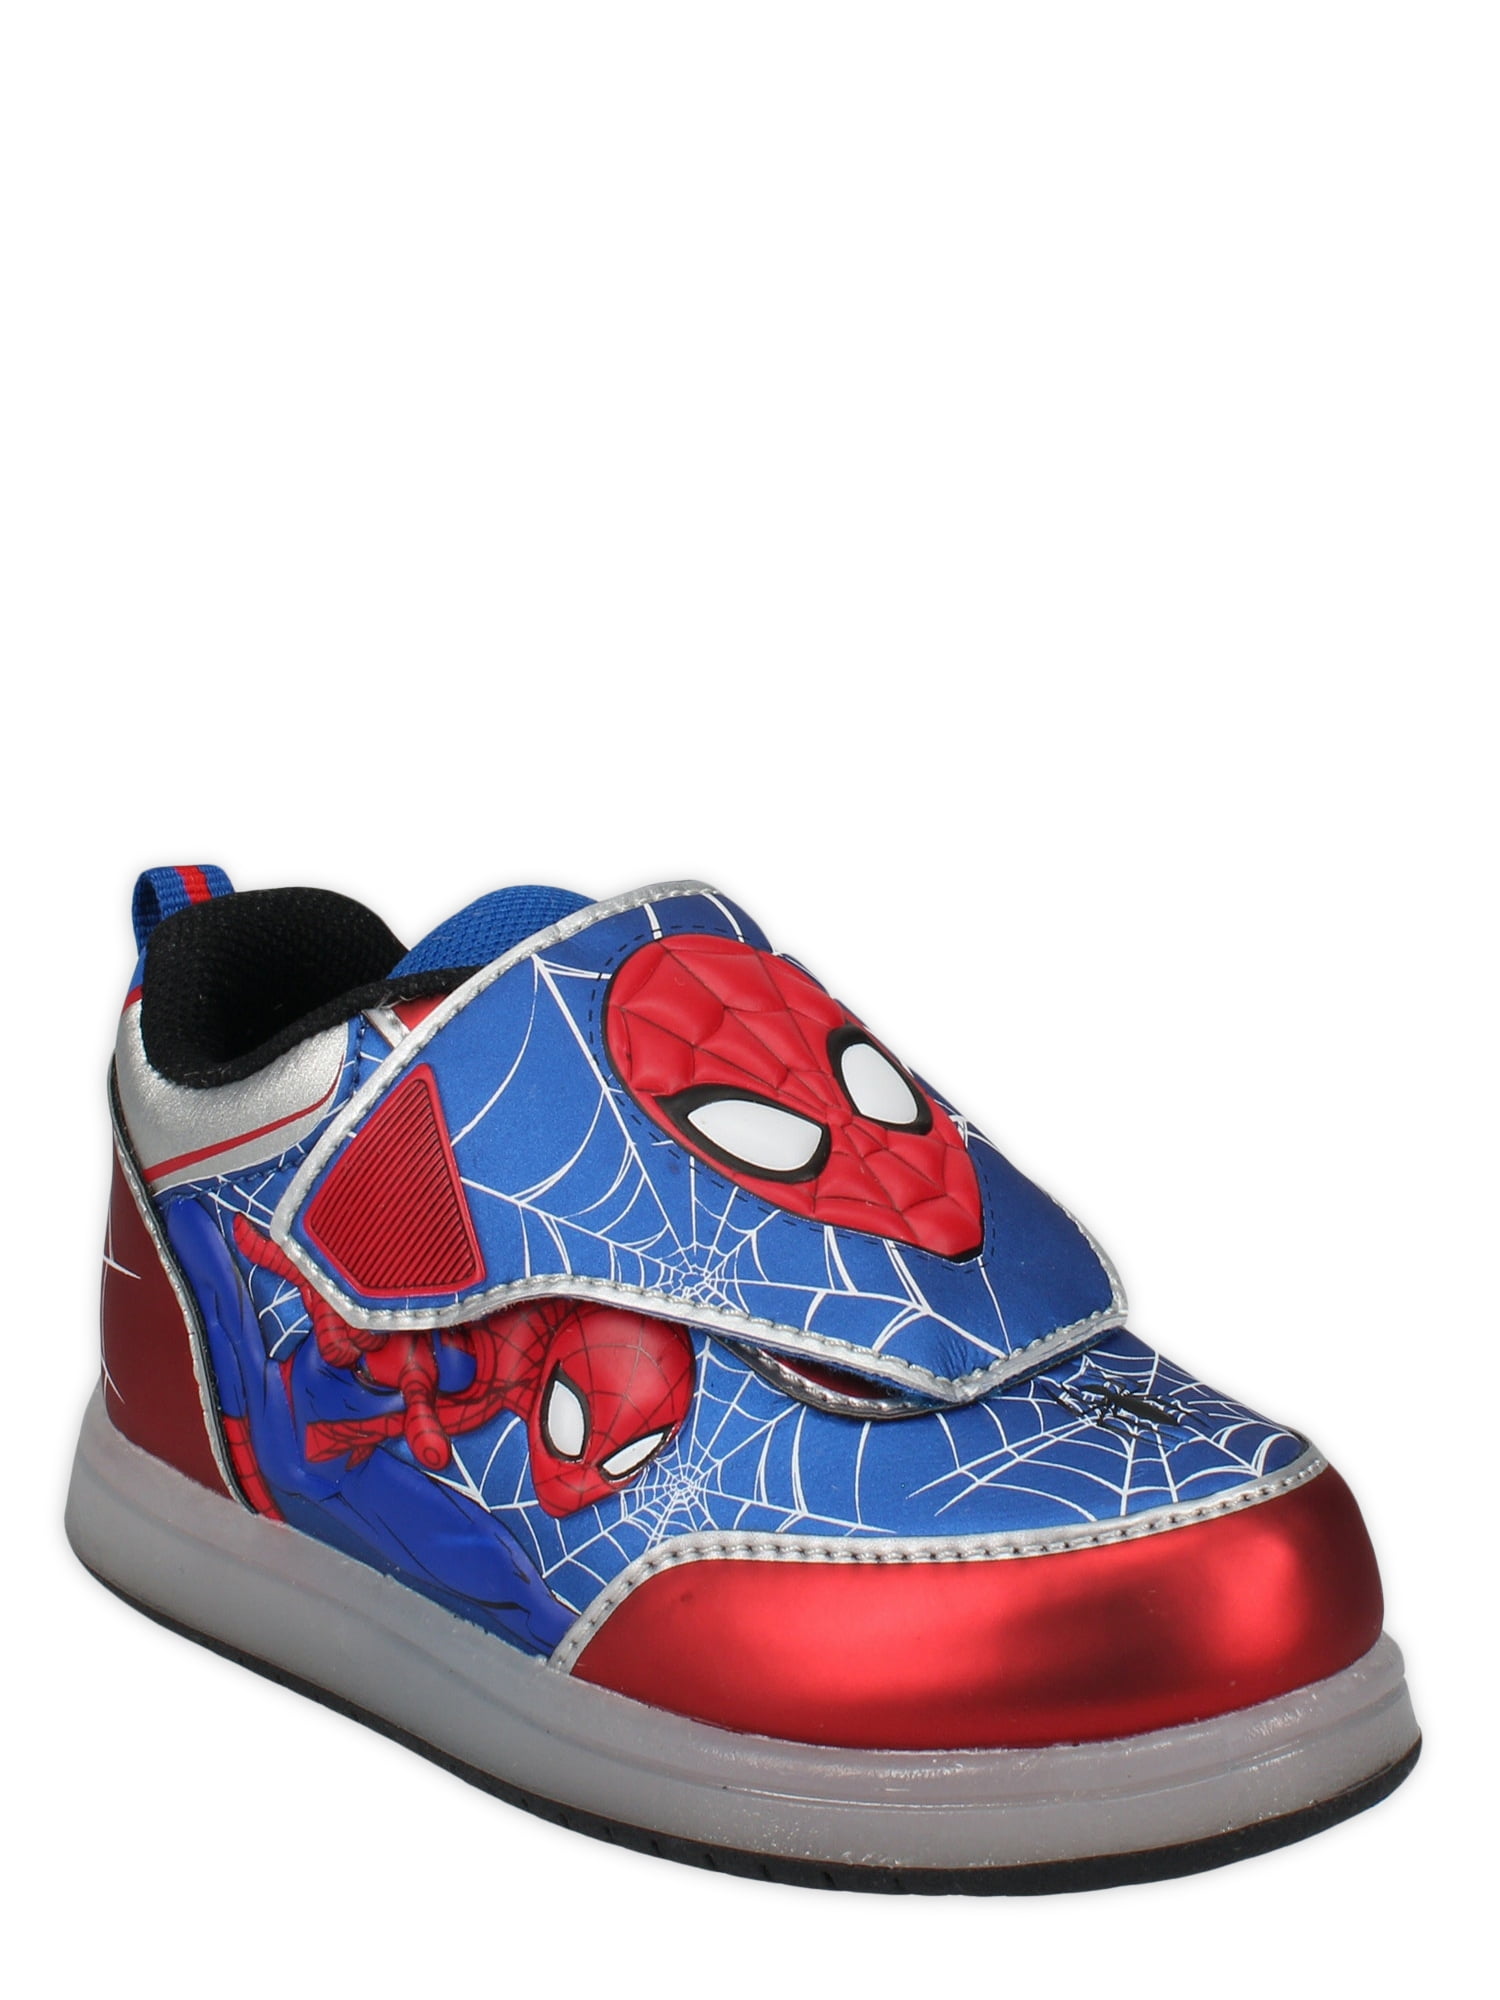 BLUE MARVEL Spider-Man Toddler size 8 Boys License Light Up Casual Shoes RED 